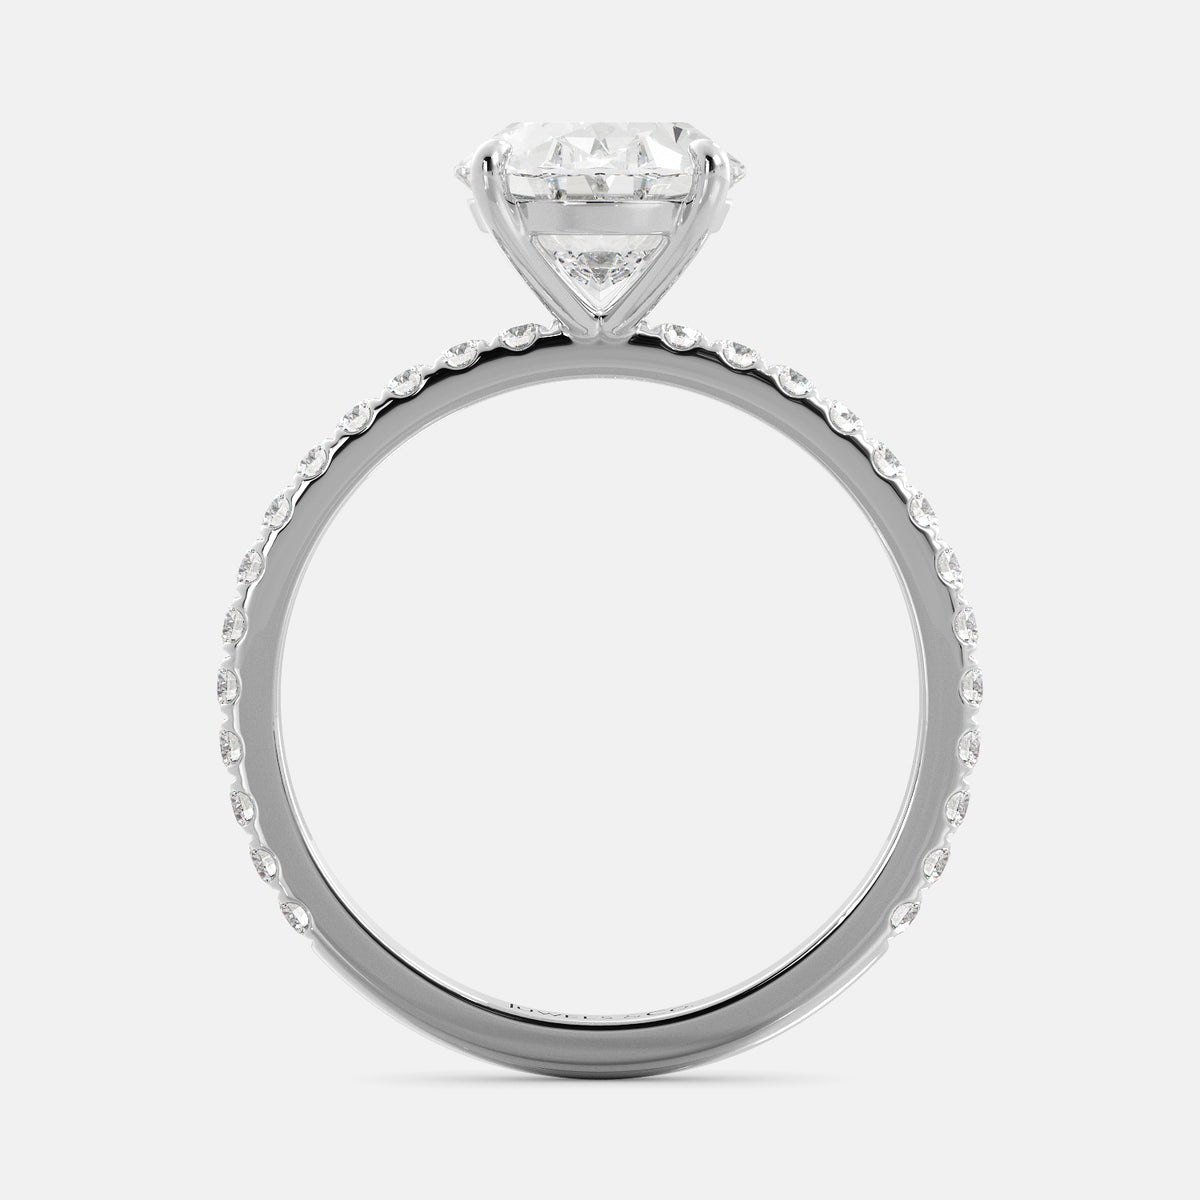 The Trendsetting Oval Solitaire Diamond Ring with Pavé